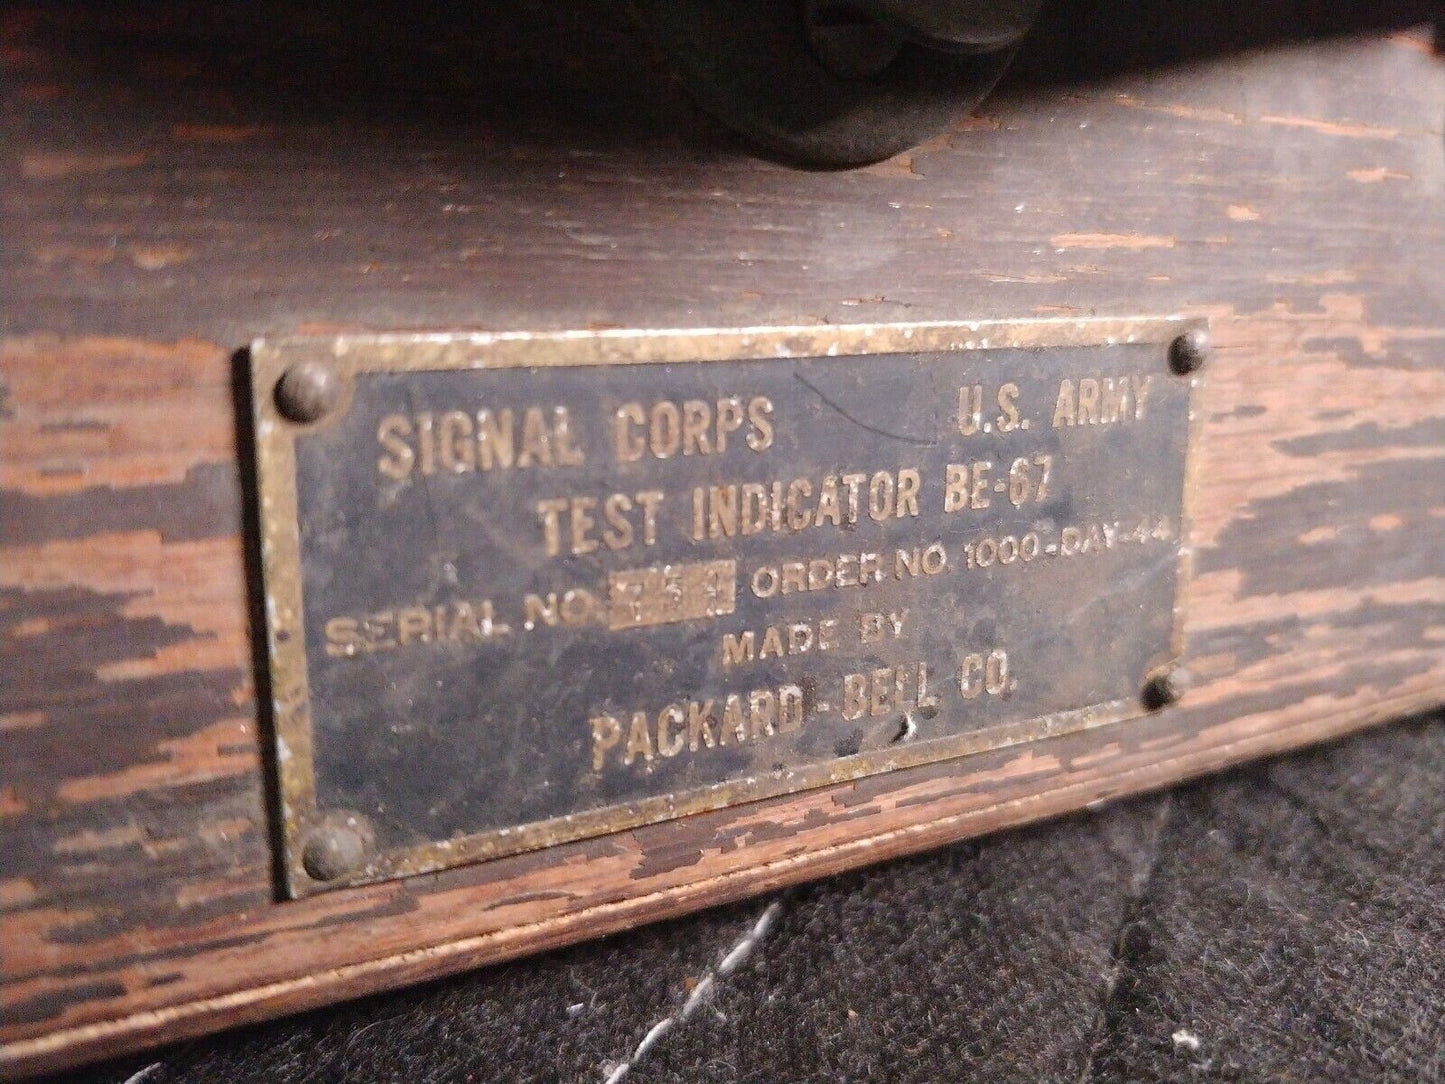 Vintage US Army Signal Corps Test Indicator BE-67 - Packard Bell Co.